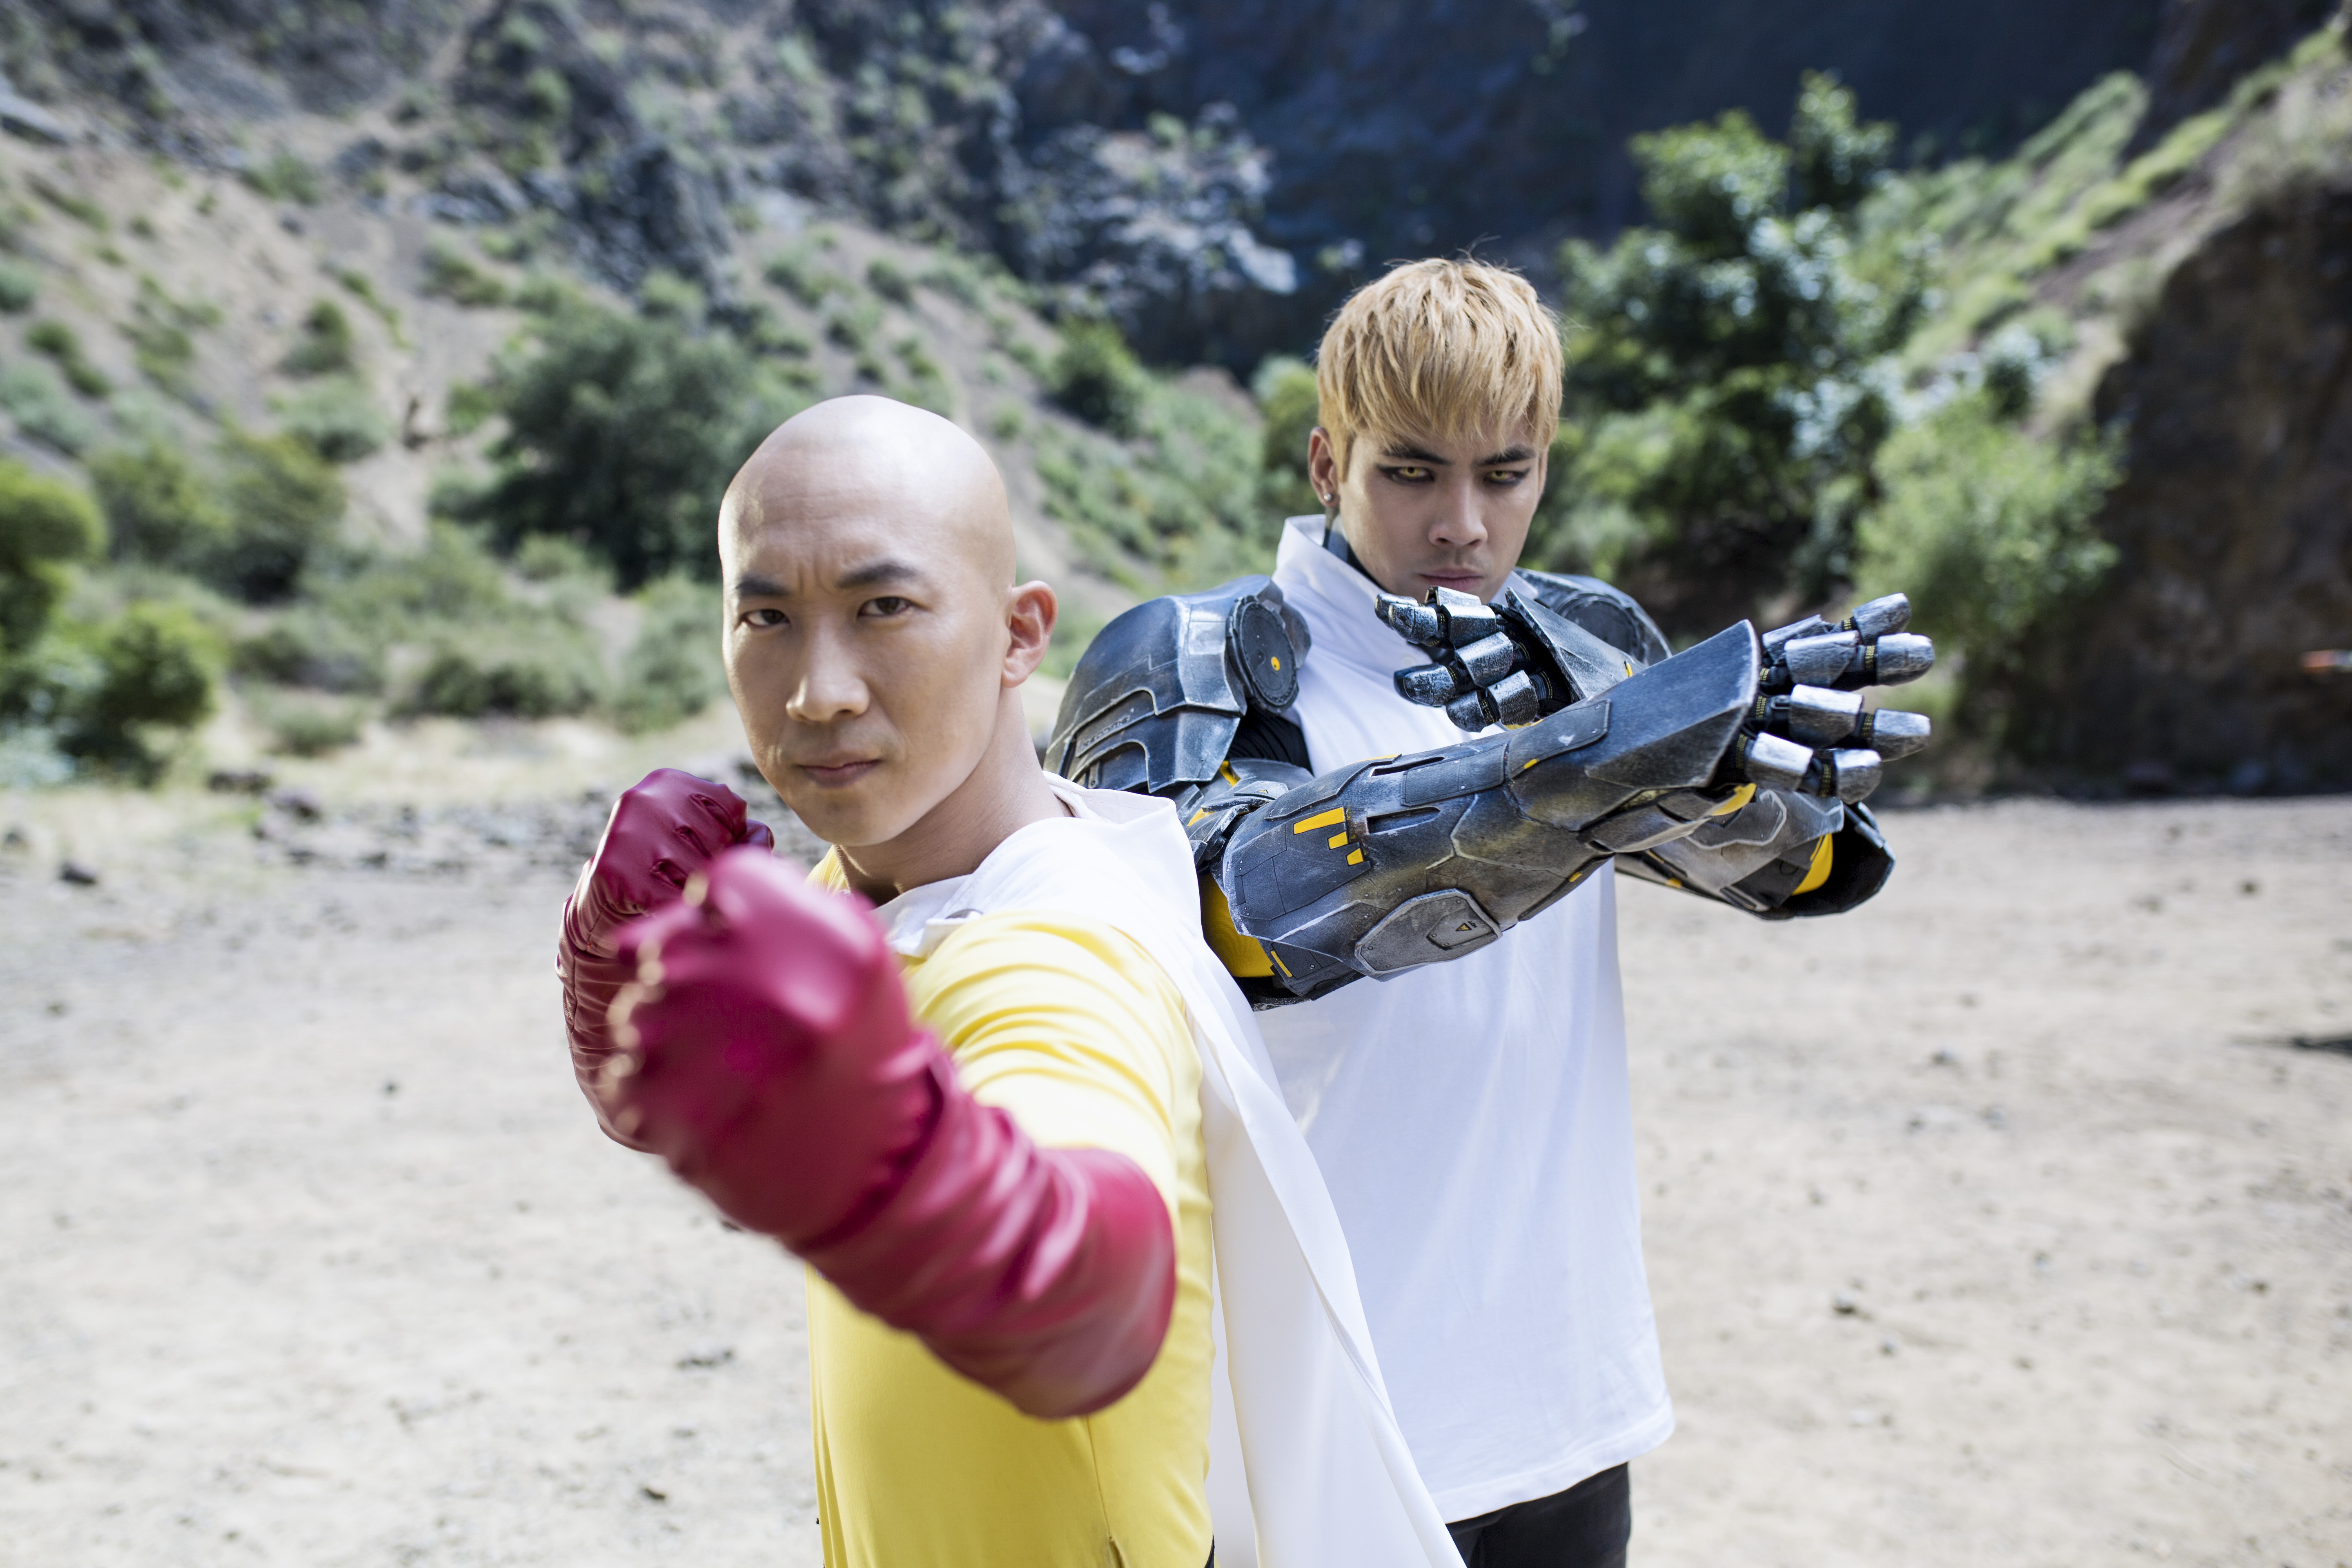 A Live-Action One Punch Man Movie Is In Development At Sony